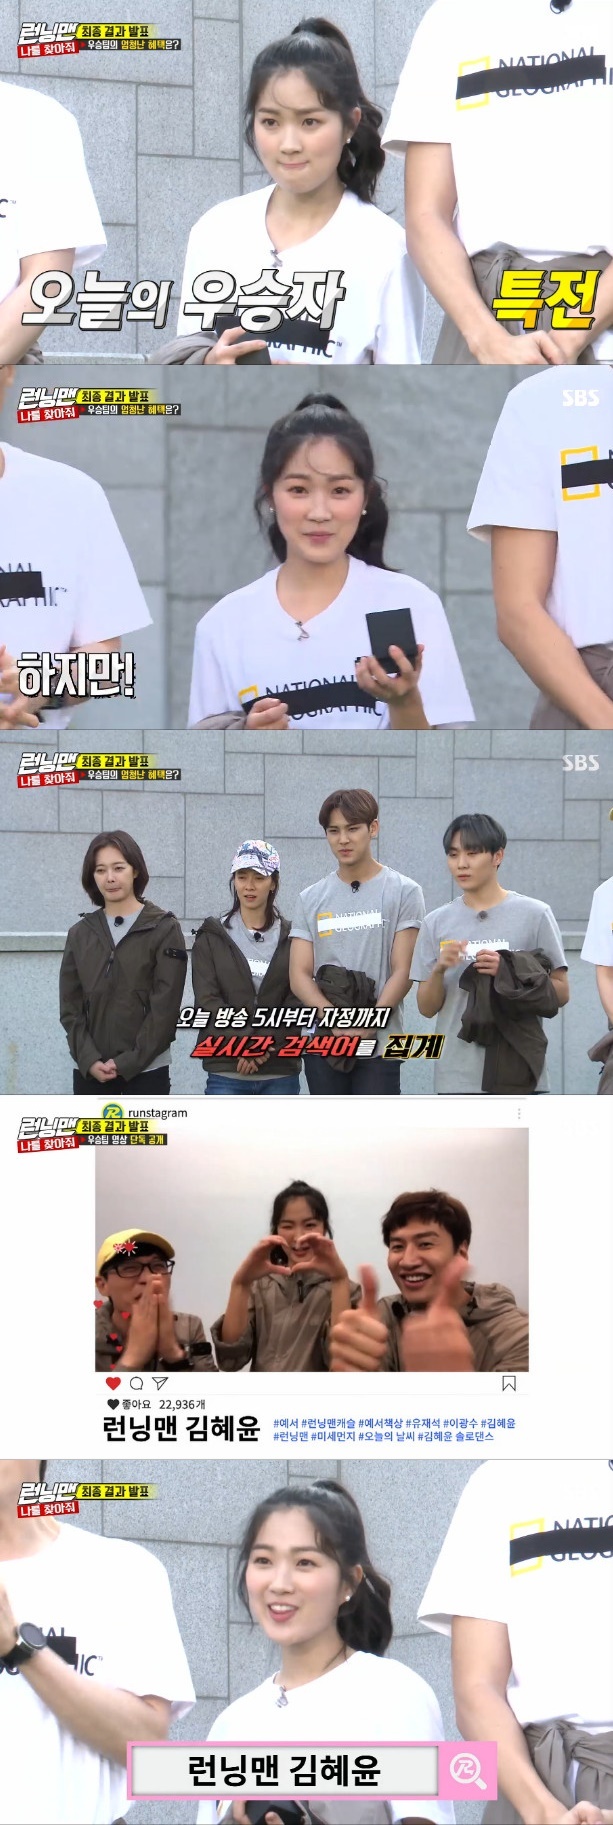 Seoul) = Actor Kim Hye-yoon caught the eye with his anti-war charm.On the afternoon of the 21st, SBS Running Man appeared in the actor Kim Hye-yoon, Han Bo-reum, group EXIDs Hani Solji, Seventeens Mingyu, and Seung-gwan.This mission should be the first in real-time search terms, said the production team. Yoo Jae-Suk usually expressed his displeasure that the Masked Wang does not take the first place.The production team said, The four hot guest teams will appear with Running Man. The name Running Man OOO should be ranked in the search query. Kim Hye-yoon, who played a role as a example in the JTBC drama SKY Castle, all shouted Yes.Kim Hye-yoon said, I graduated from college this year and am living a career. I have not decided yet.Kim Hye-yoon said, I realized a little bit after being invited to Running Man when I asked Do you realize the popularity?Yoo Jae-Suk said, The world is fast and popularity is cooled down quickly. Nowadays, entertainment or drama is quickly fading.Is not there so much new stuff? Kim Hye-yoon said, I recently went to Kim Young-chuls Power FM and came to the top of the list.Yoo Jae-Suk also said, It is time for the morning time to be able to afford the ranking of the real sword.The members criticized stop hurting me, but Kim Jong Kook said, It is my style.Kim Hye-yoon di Yoo Jae-Suk, Lee Kwang-soo teamed up and four teams played.First, the first showdown was a reenactment of the drama scene and a popular quiz showdown. The members were well-matched in the drama, but failed in the song quiz.Among them, Kim Hye-yoon followed the choreography to the hit song Tududoudo of Black Pink that came out of the quiz.Yoo Jae-Suk and Lee Kwang-soo, who saw this, laid a plate to see Kim Hye-yoons dance.Kim Hye-yoon danced hard when the song came out, but he did not know the right choreography or did not do well. Yoo Jae-Suk said, I thought it was good.Im sorry, Im wrong. Lee Kwang-soo said, If you cant do it, you cant do it. Why did you go out confidently?The members posted promotional videos for each team on Running Man SNS.Kim Hye-yoon, a former broadcasting dance club, surprised Yoo Jae-Suk and Lee Kwang-soo by saying Telmy of One The Girls, a song that can dance.Among the latest songs, Momorands Foot Jennys Solo could be released, but he was also only one verse.Yoo Jae-Suk Lee Kwang-soo rolled his feet as if he became the manager of Kim Hye-yoon.Eventually, the video was completed by Kim Hye-yoons SKY Castle ambassador, group dance, and Solo.Kim Hye-yoon, who was enthusiastic but had a poor race record, was the first to be eliminated from the tailing race, so Kim Hye-yoons video was deleted first.After all the races, a reversal occurred. Kim Hye-yoons video won 23,000 Likes to the top. Reversal charm was the result of a reversal.